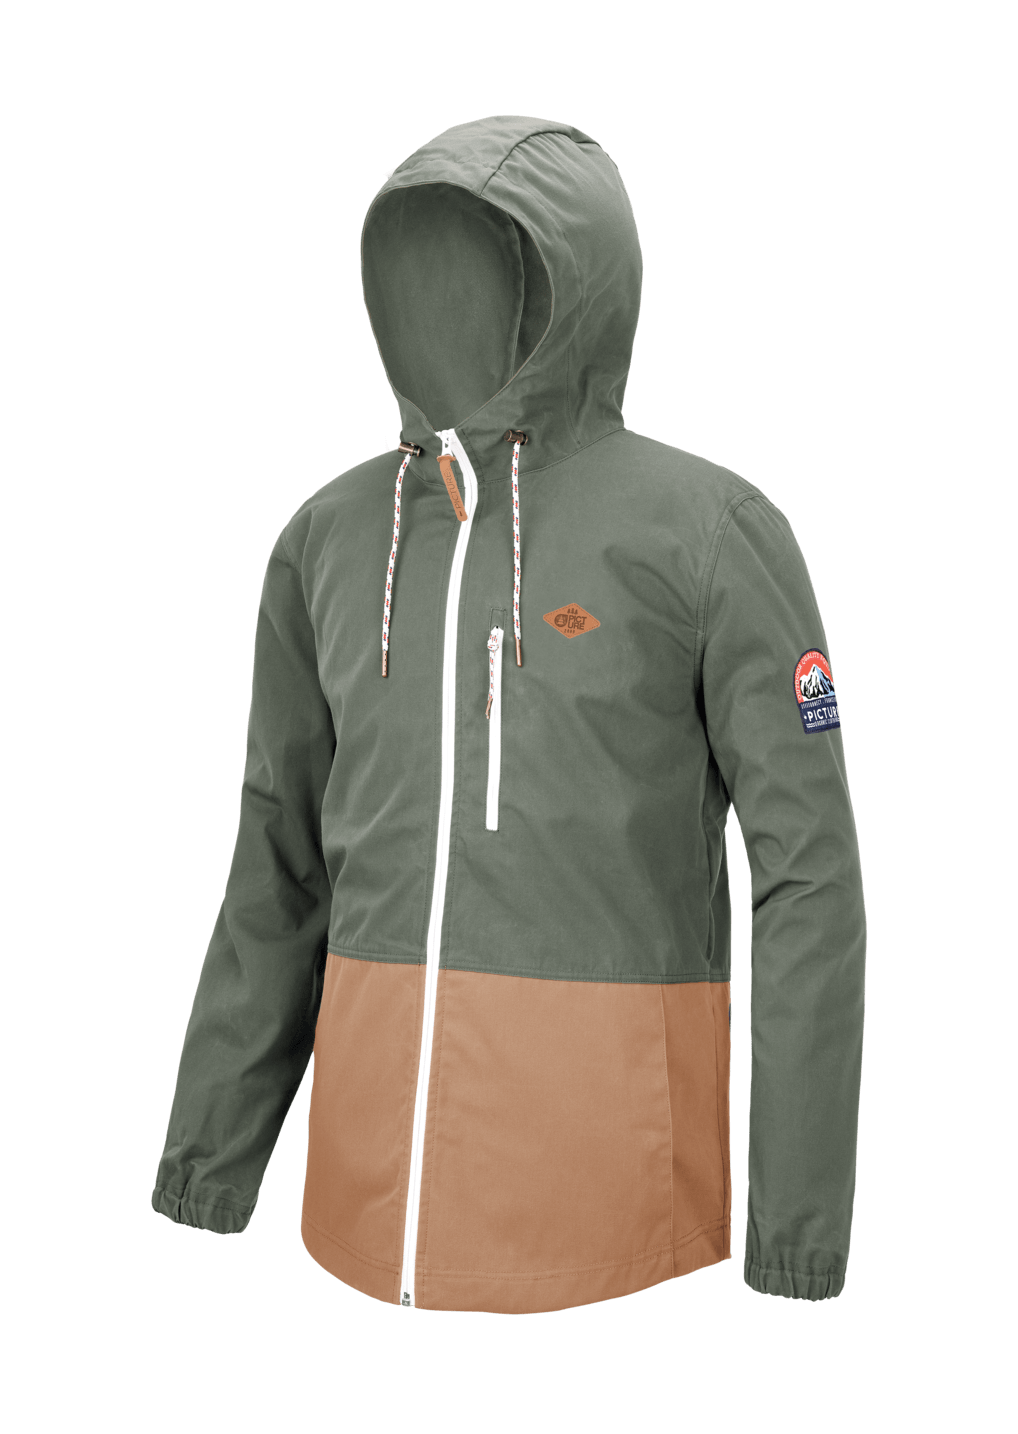 Picture Organic Men's Surface Jacket - Recycled Polyester, Army Green / M